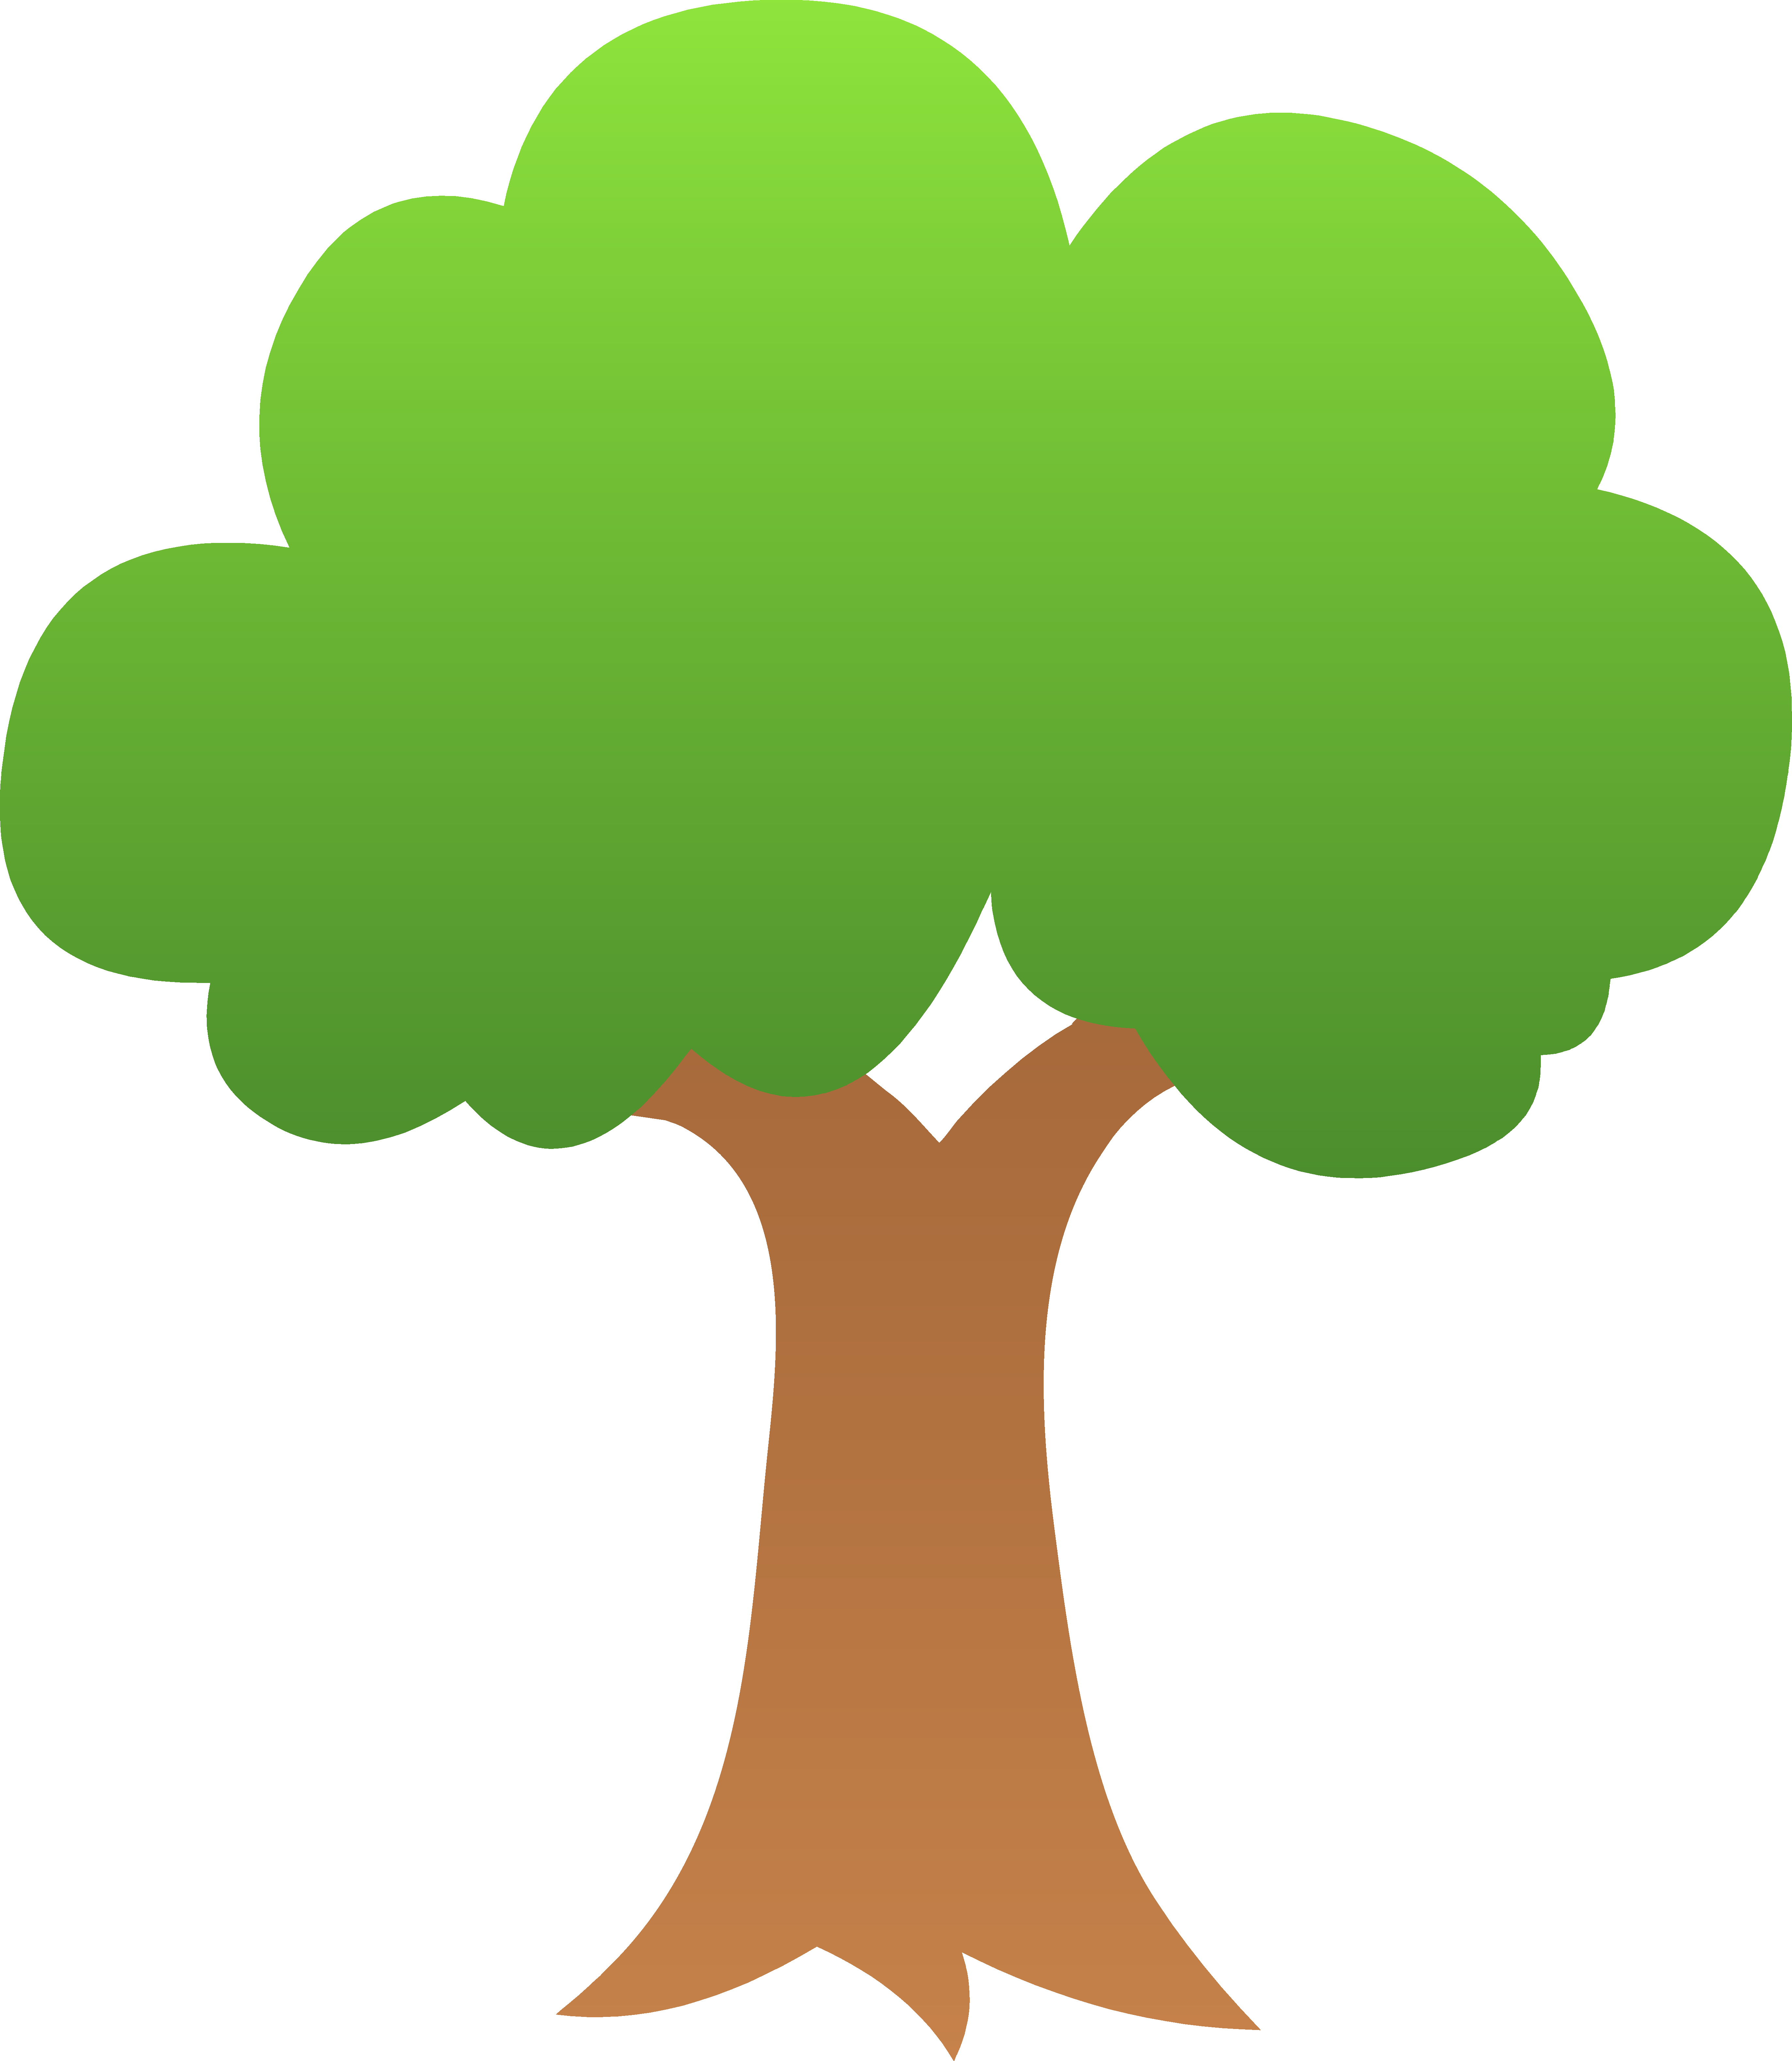 Grains clipart tree. Tiny green shaded png